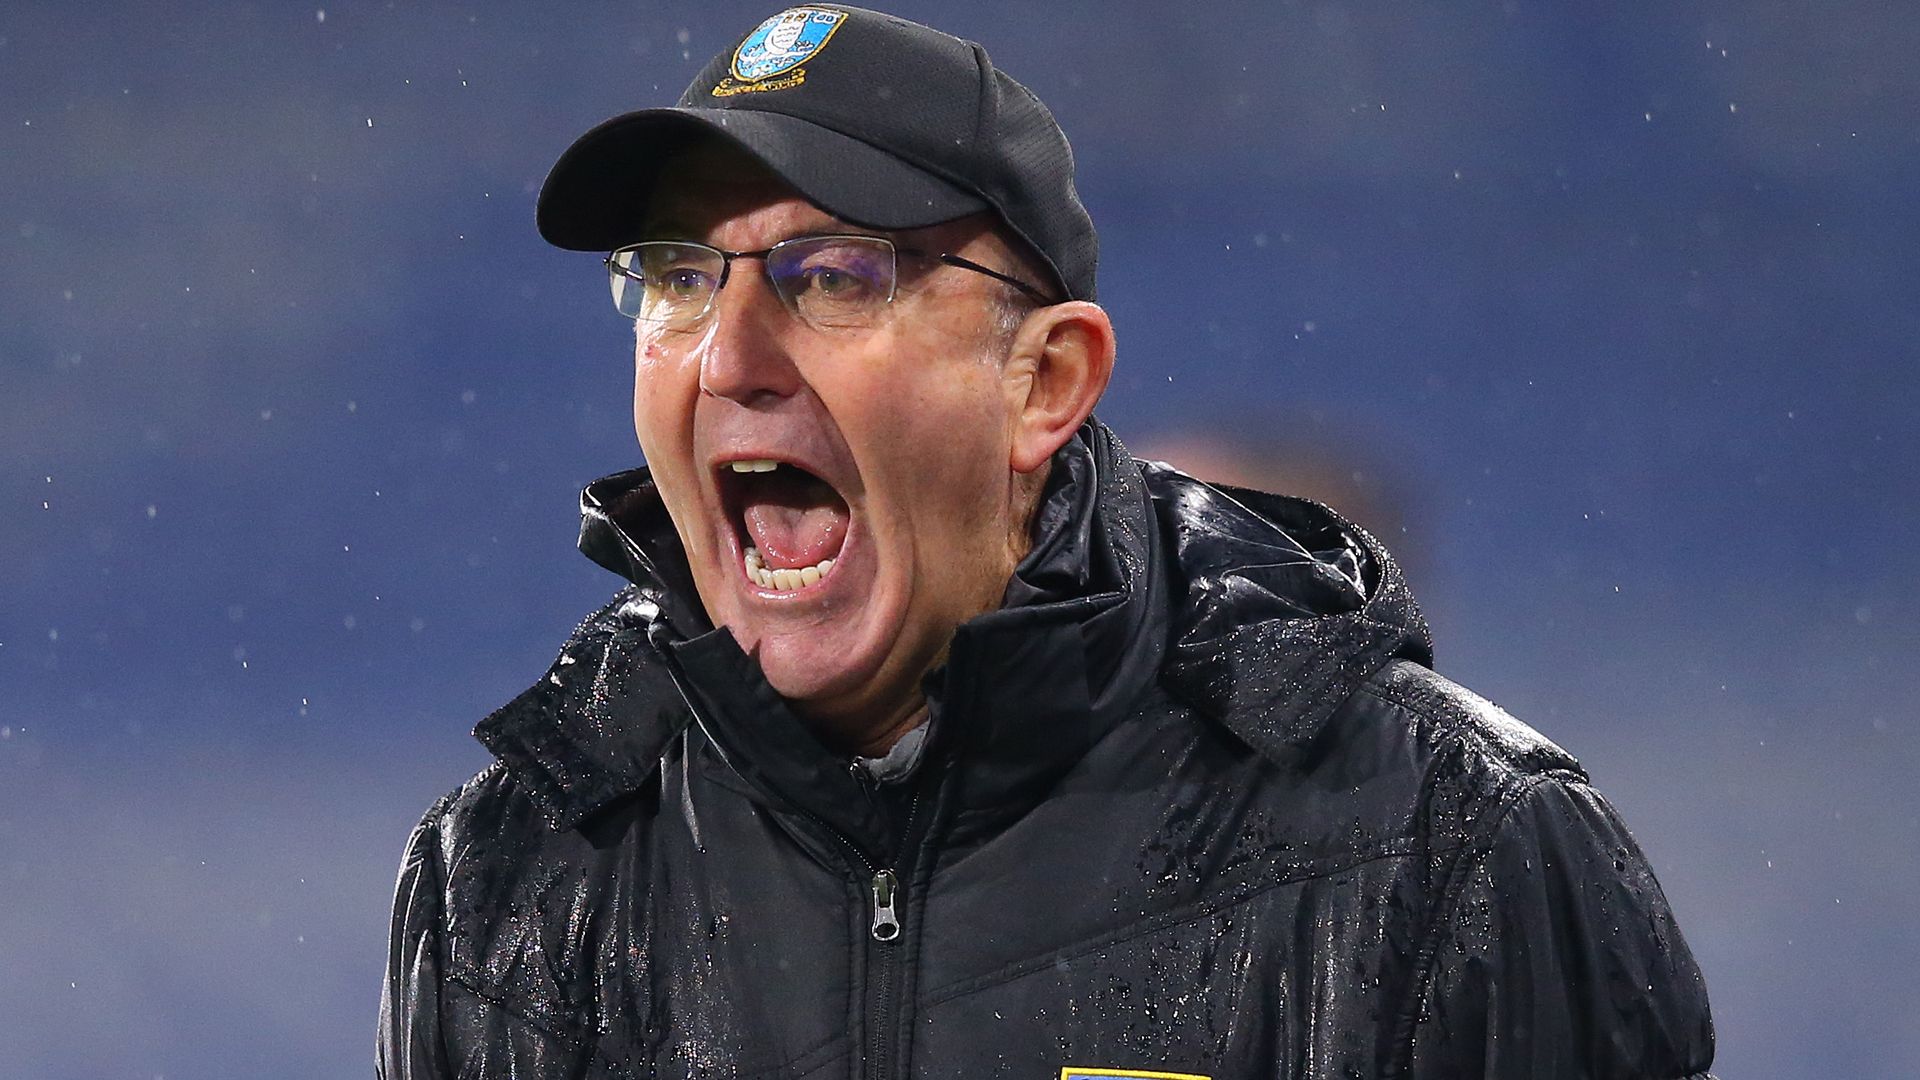 Sheffield Wednesday sack Pulis after 45 days in charge